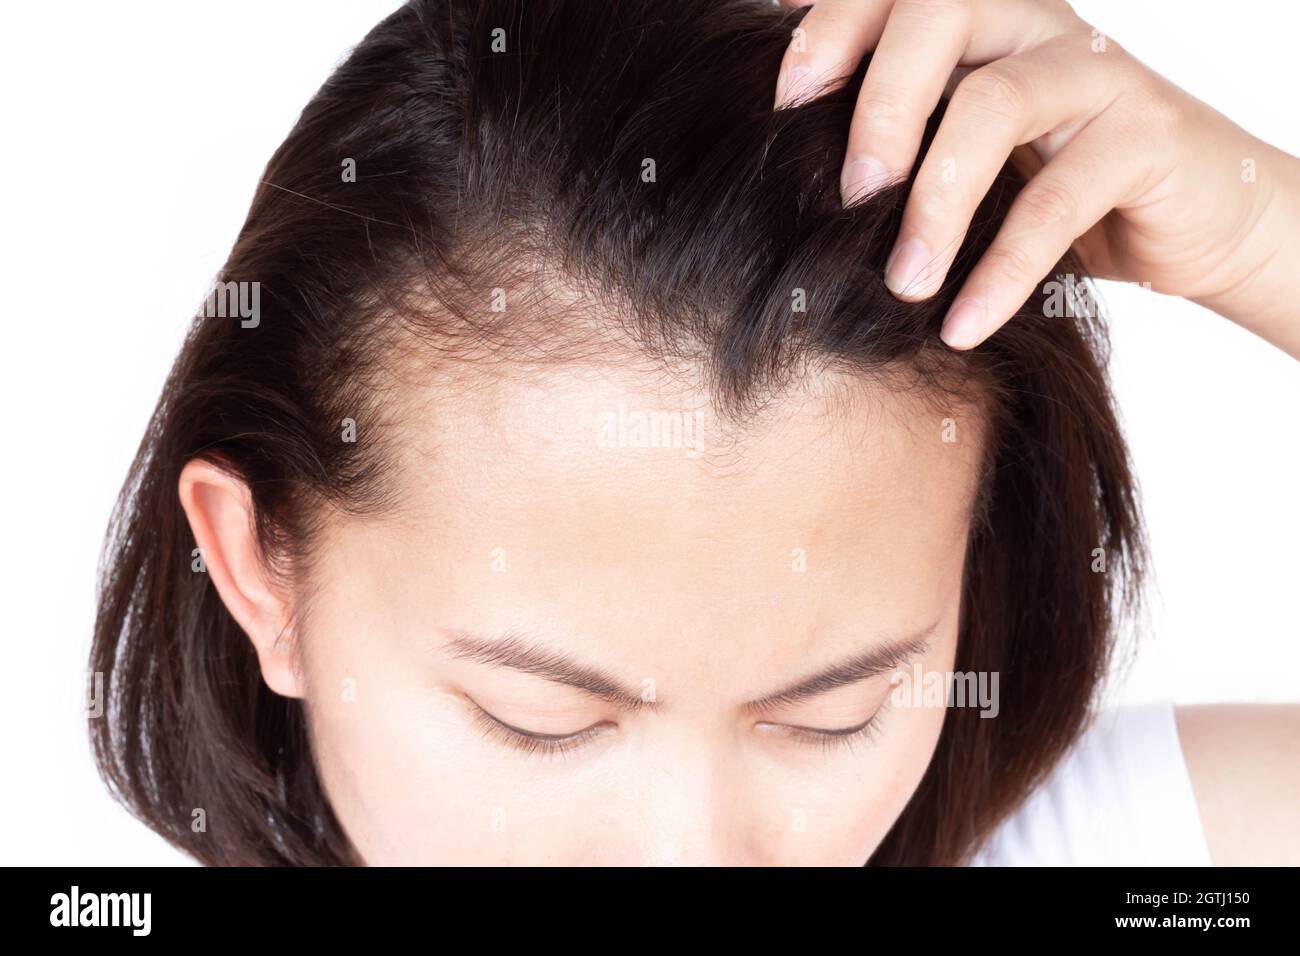 Close-up Of Woman Showing Receding Hairline Against White Background Stock Photo